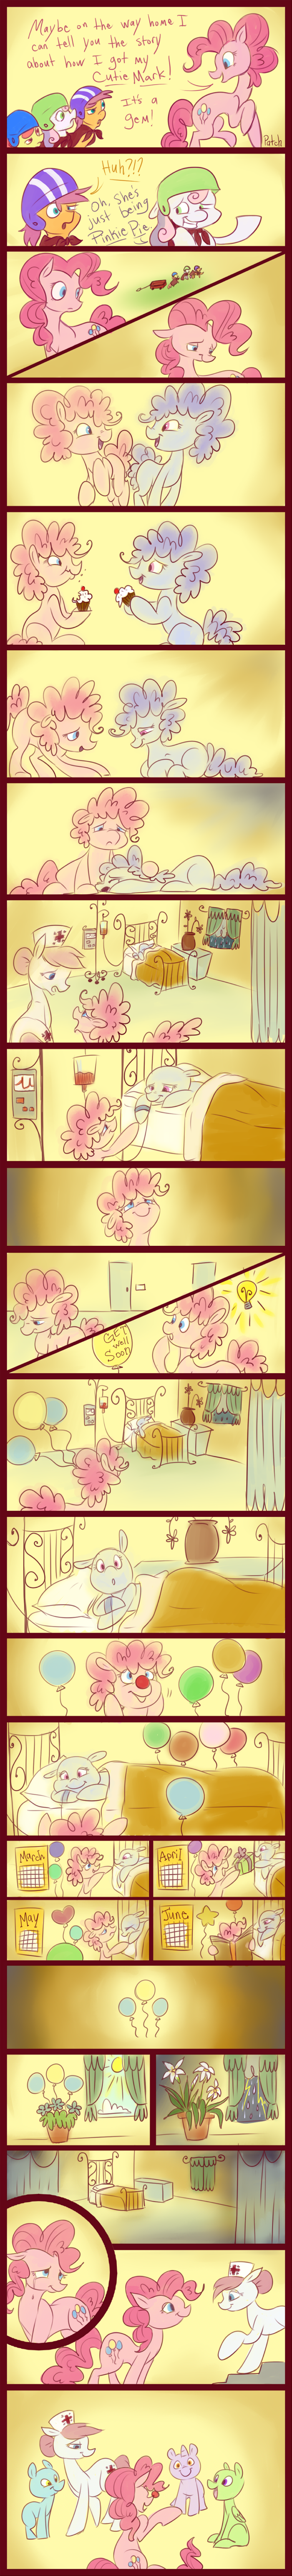 [Obrázek: carnations_and_forget_me_nots_by_pashapup-d4b1zbi.png]